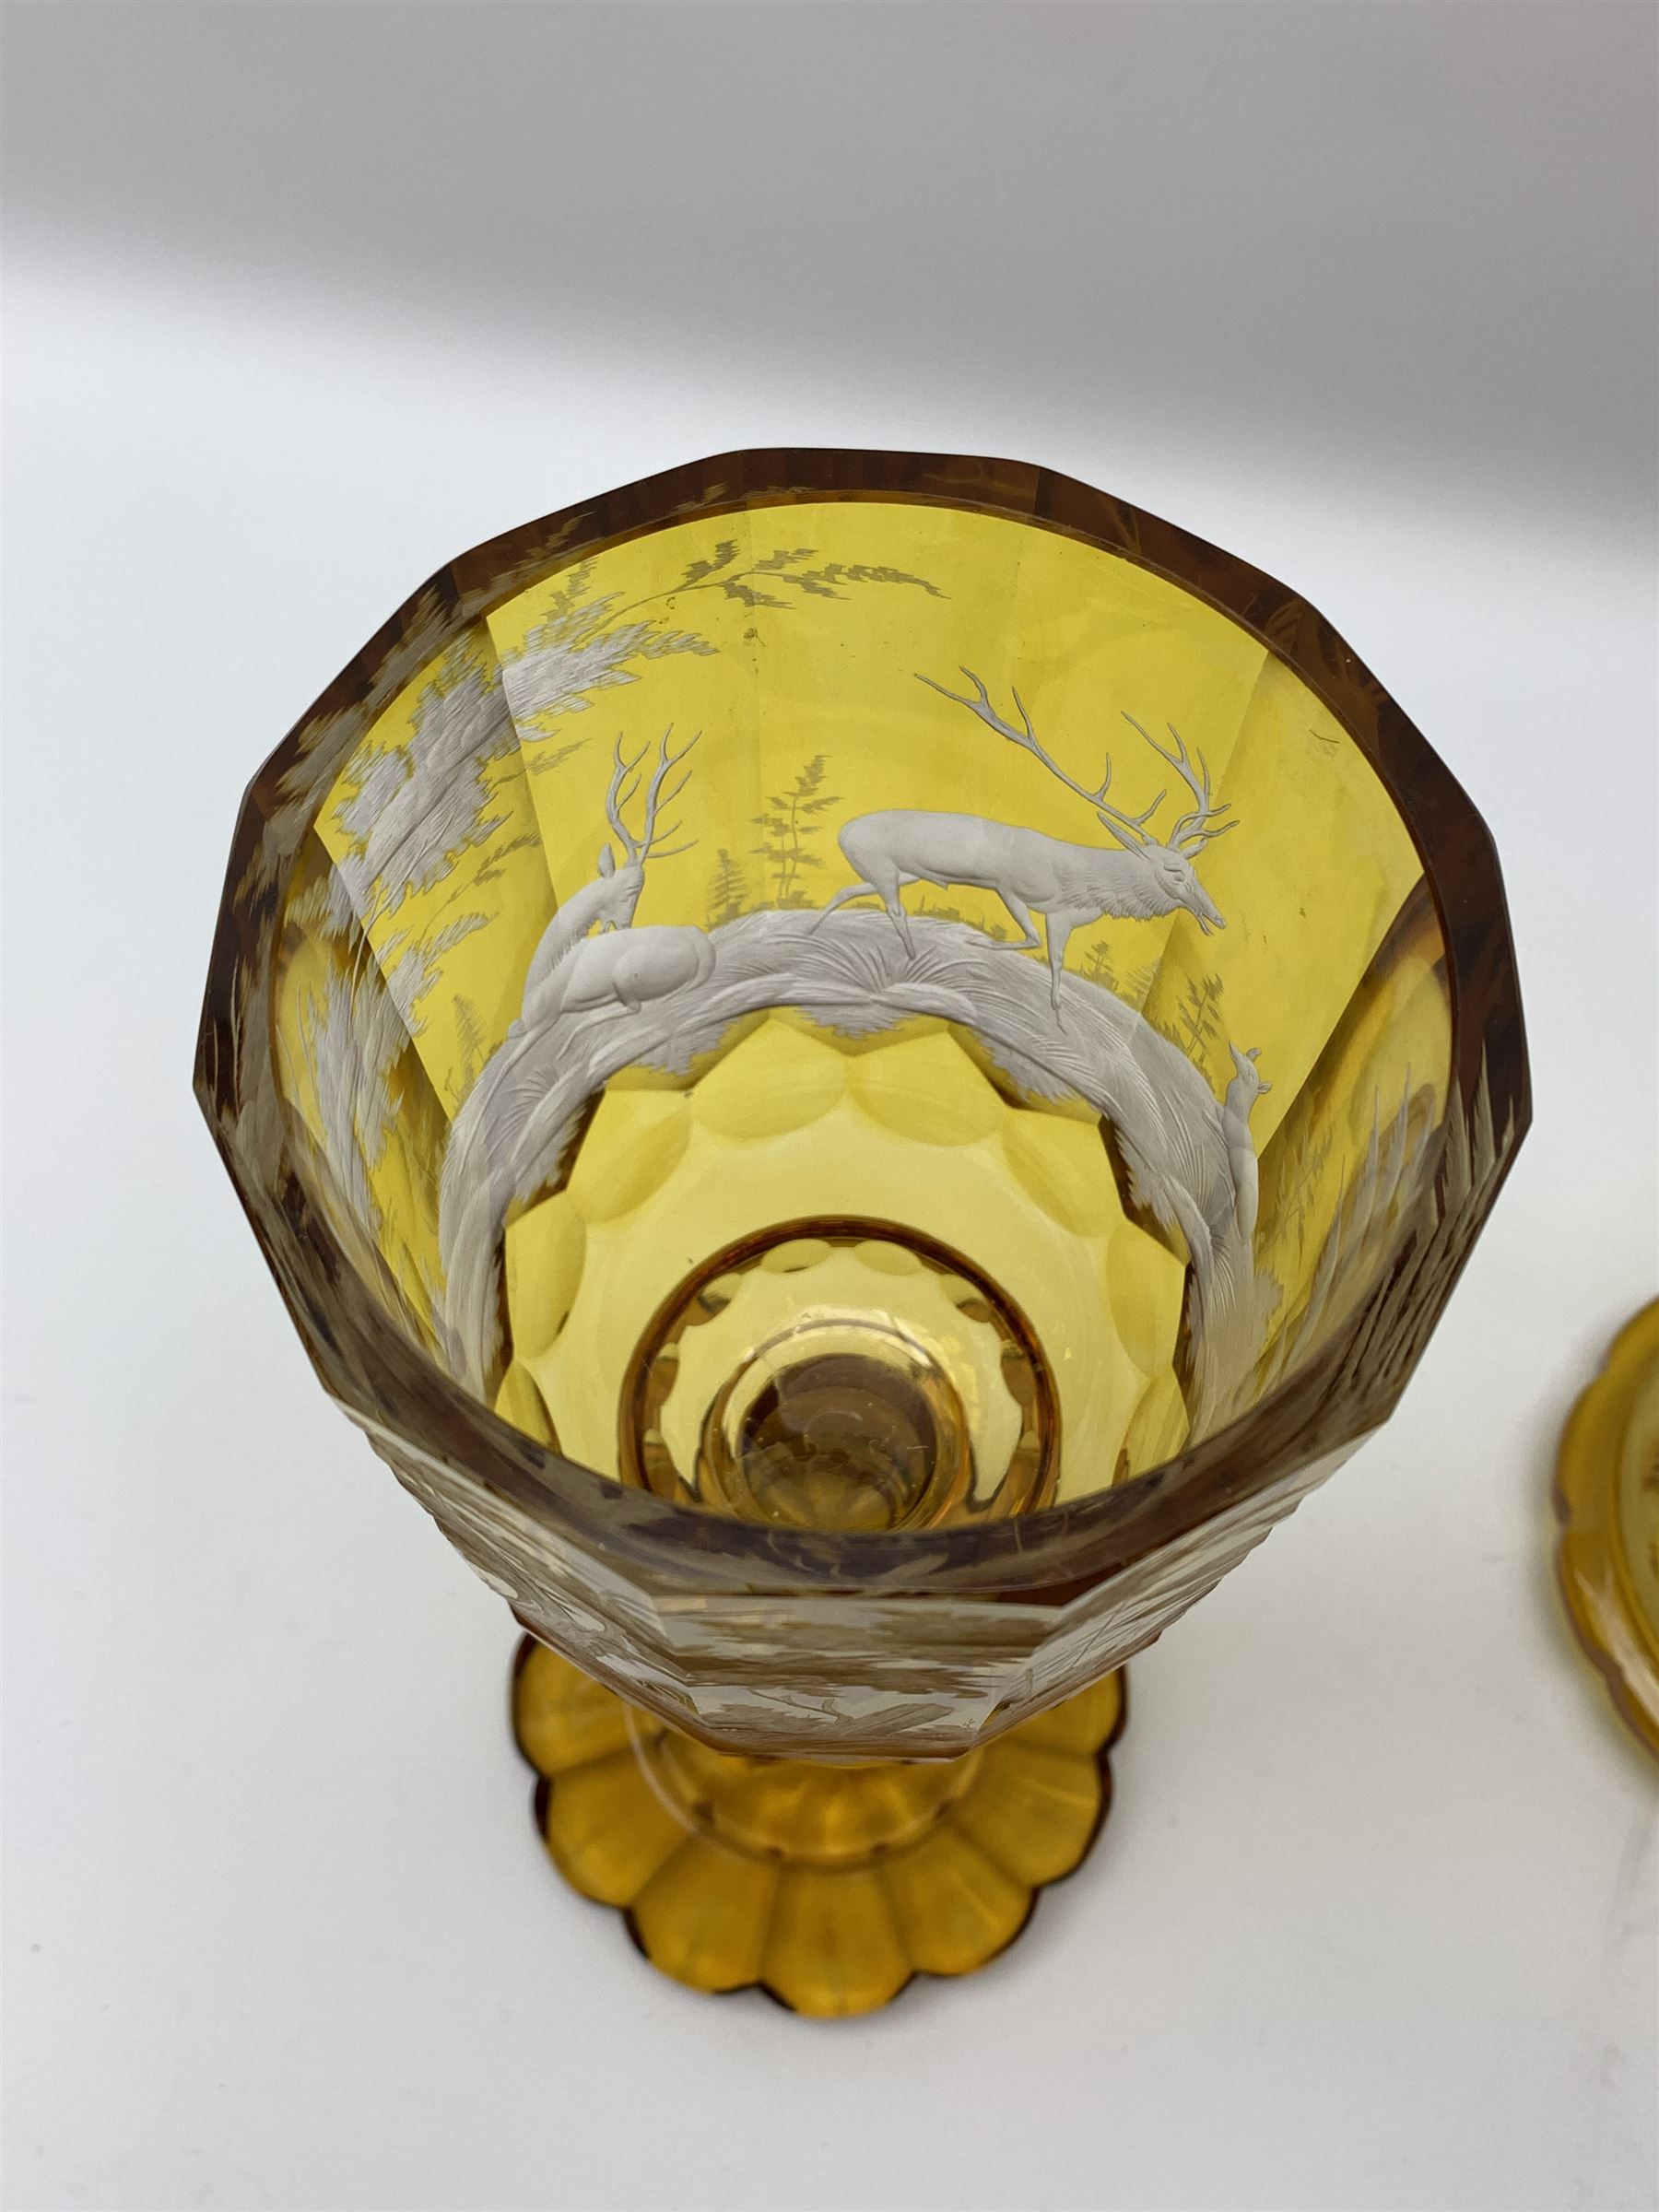 Large Bohemian amber flashed glass goblet and cover - Image 6 of 7